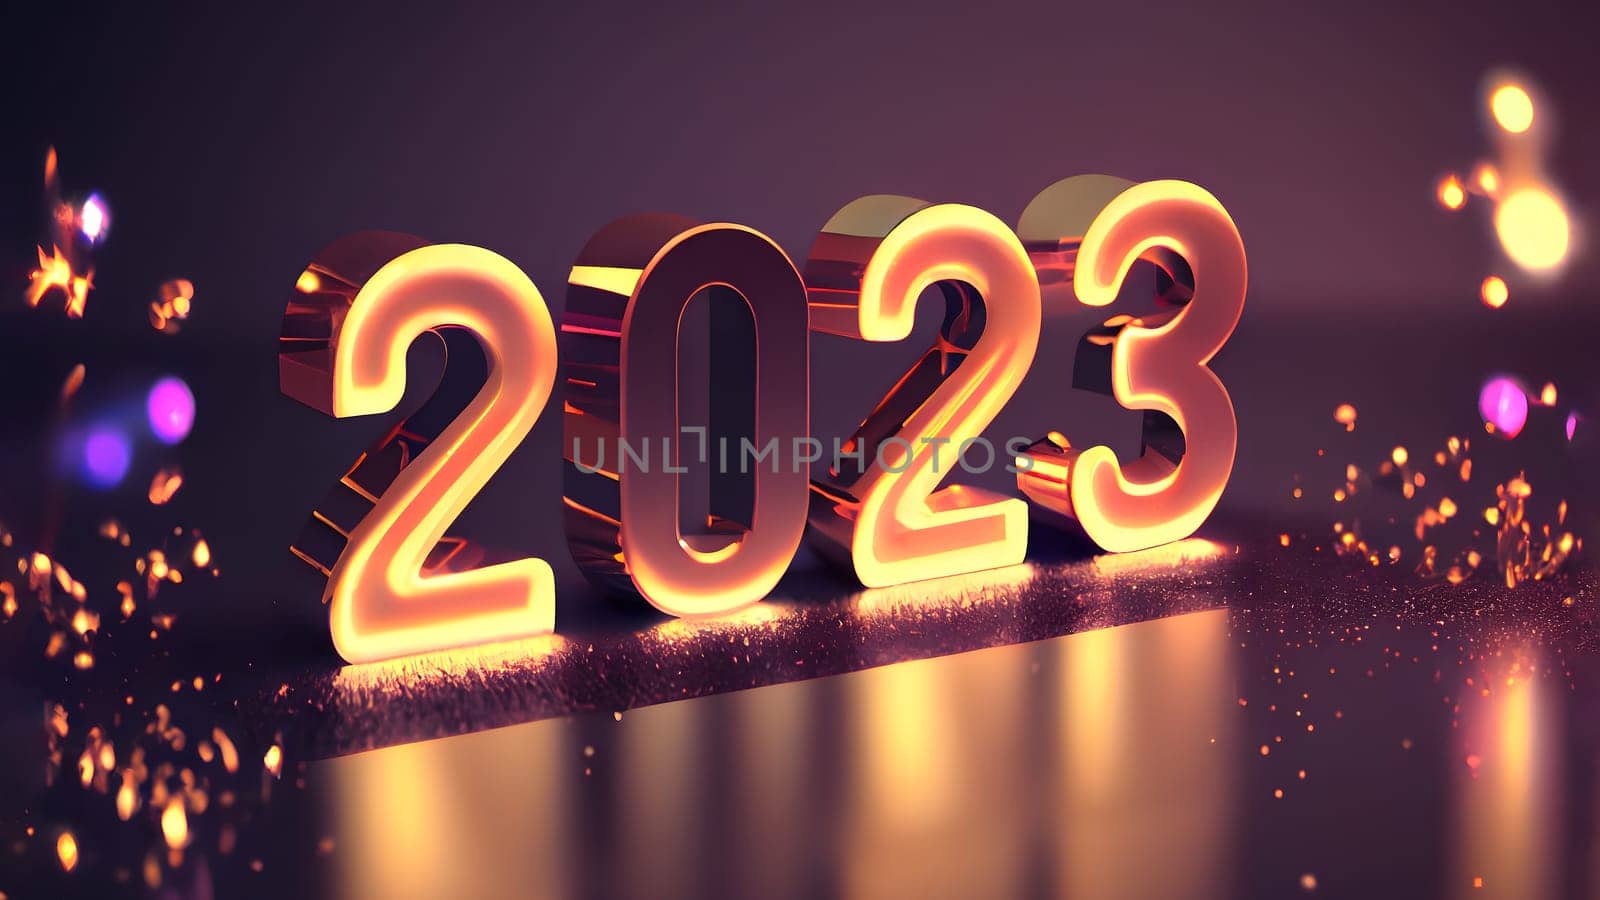 New Year background bokeh light and the letters 2023 wallpaper, neural network generated art. Digitally generated image. Not based on any actual person, scene or pattern.